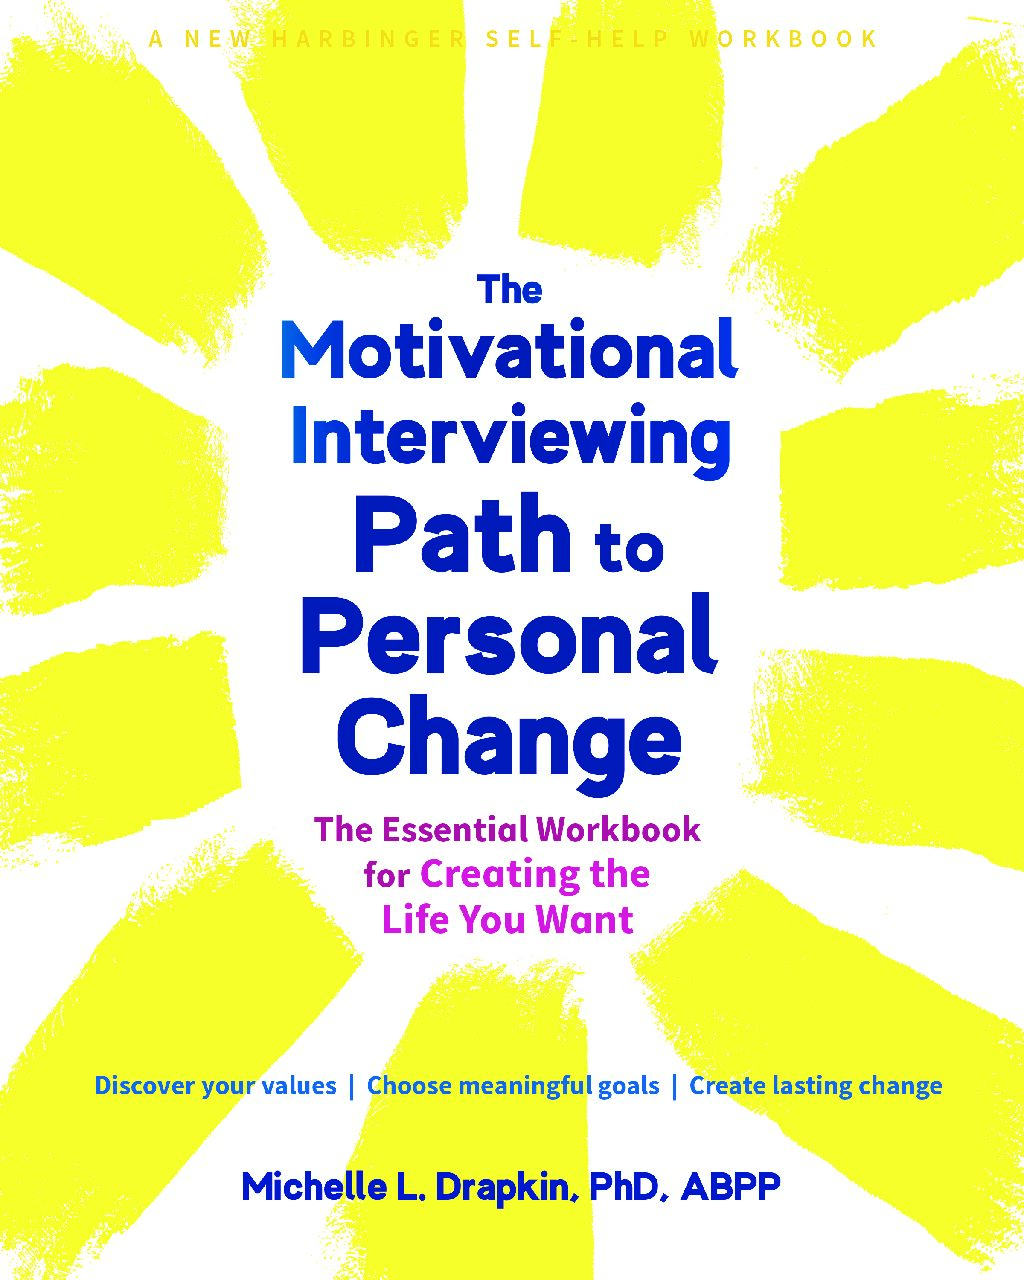 Free Motivational Interviewing as a Path to Personal Change